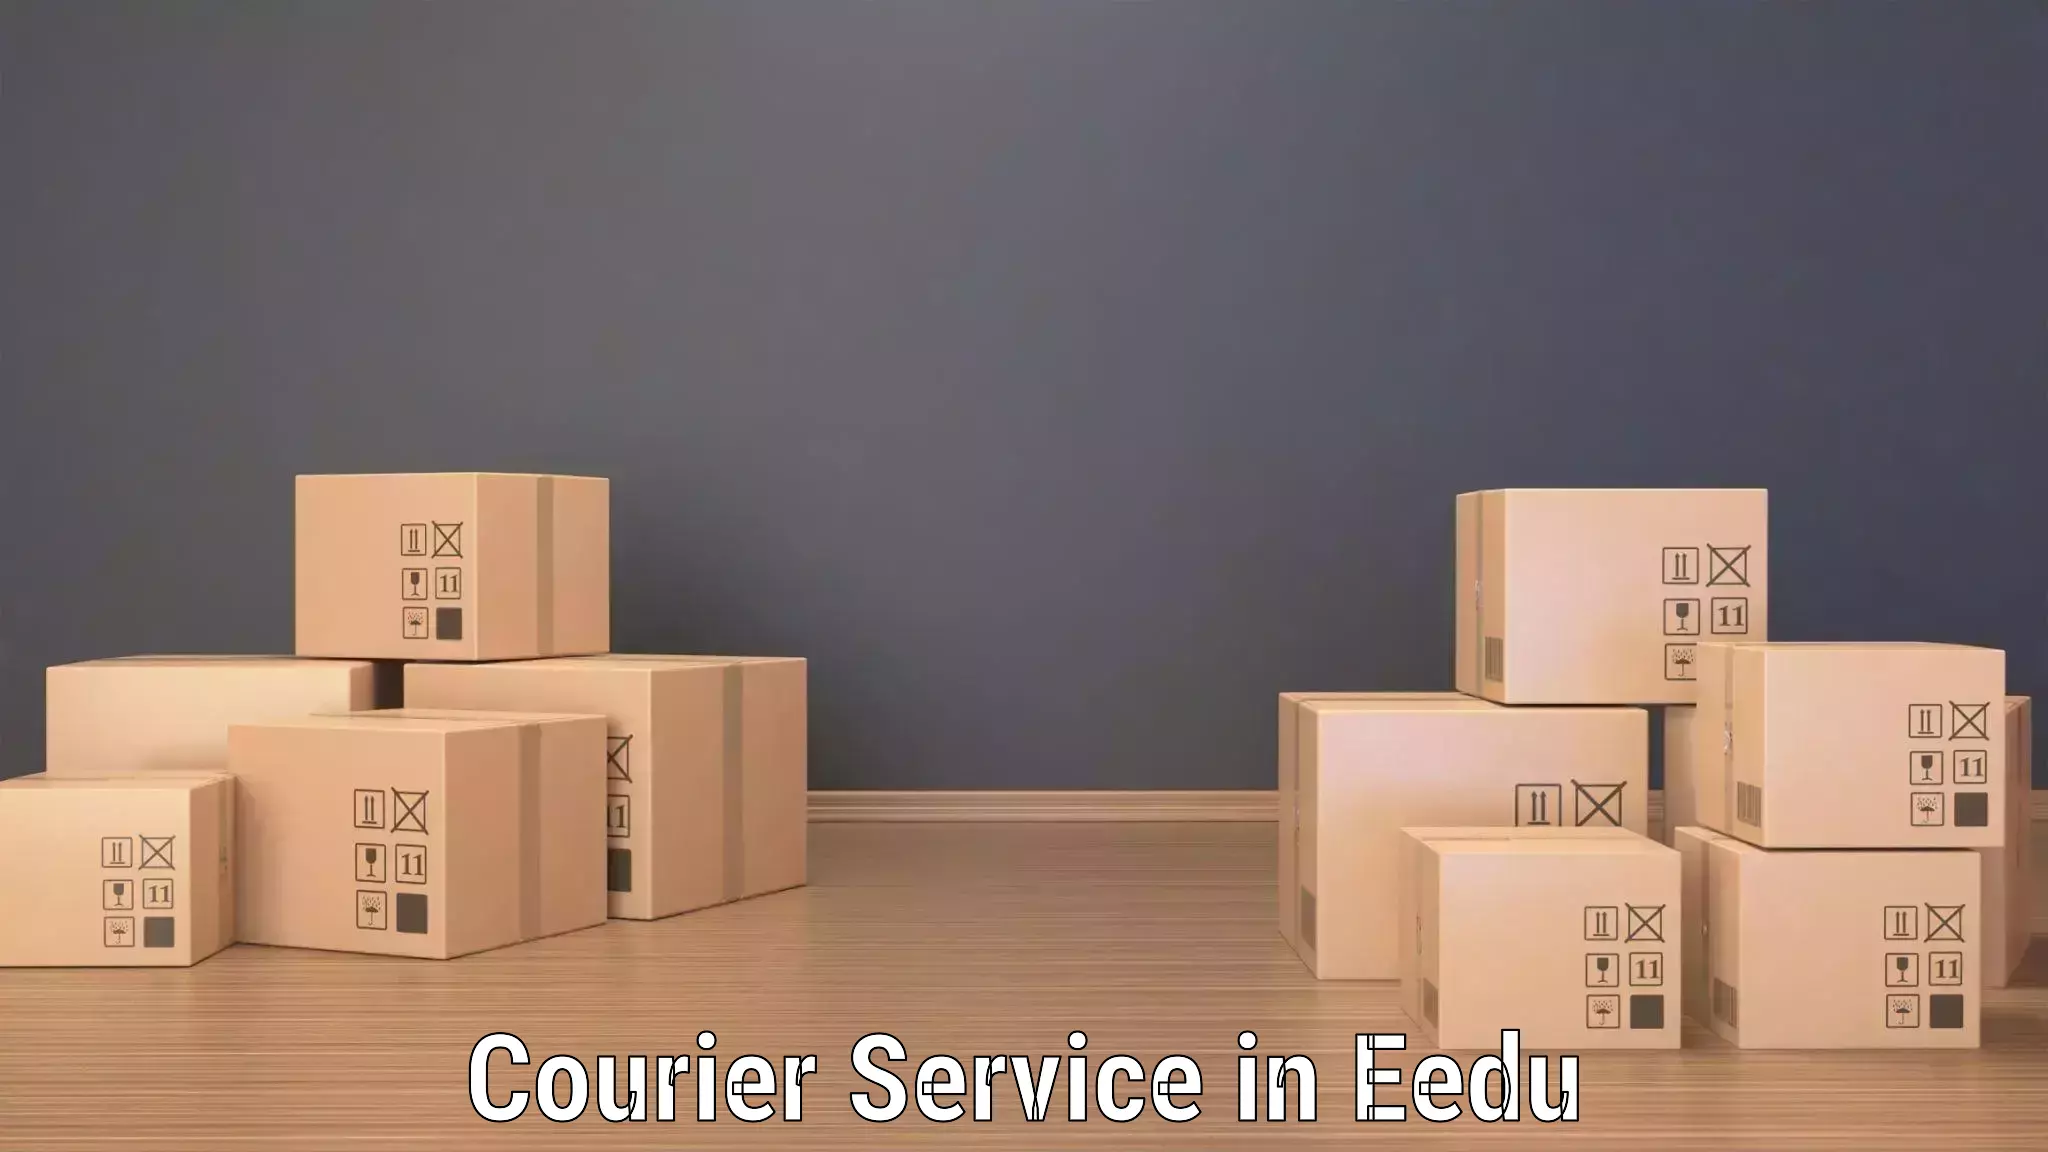 Personal parcel delivery in Eedu